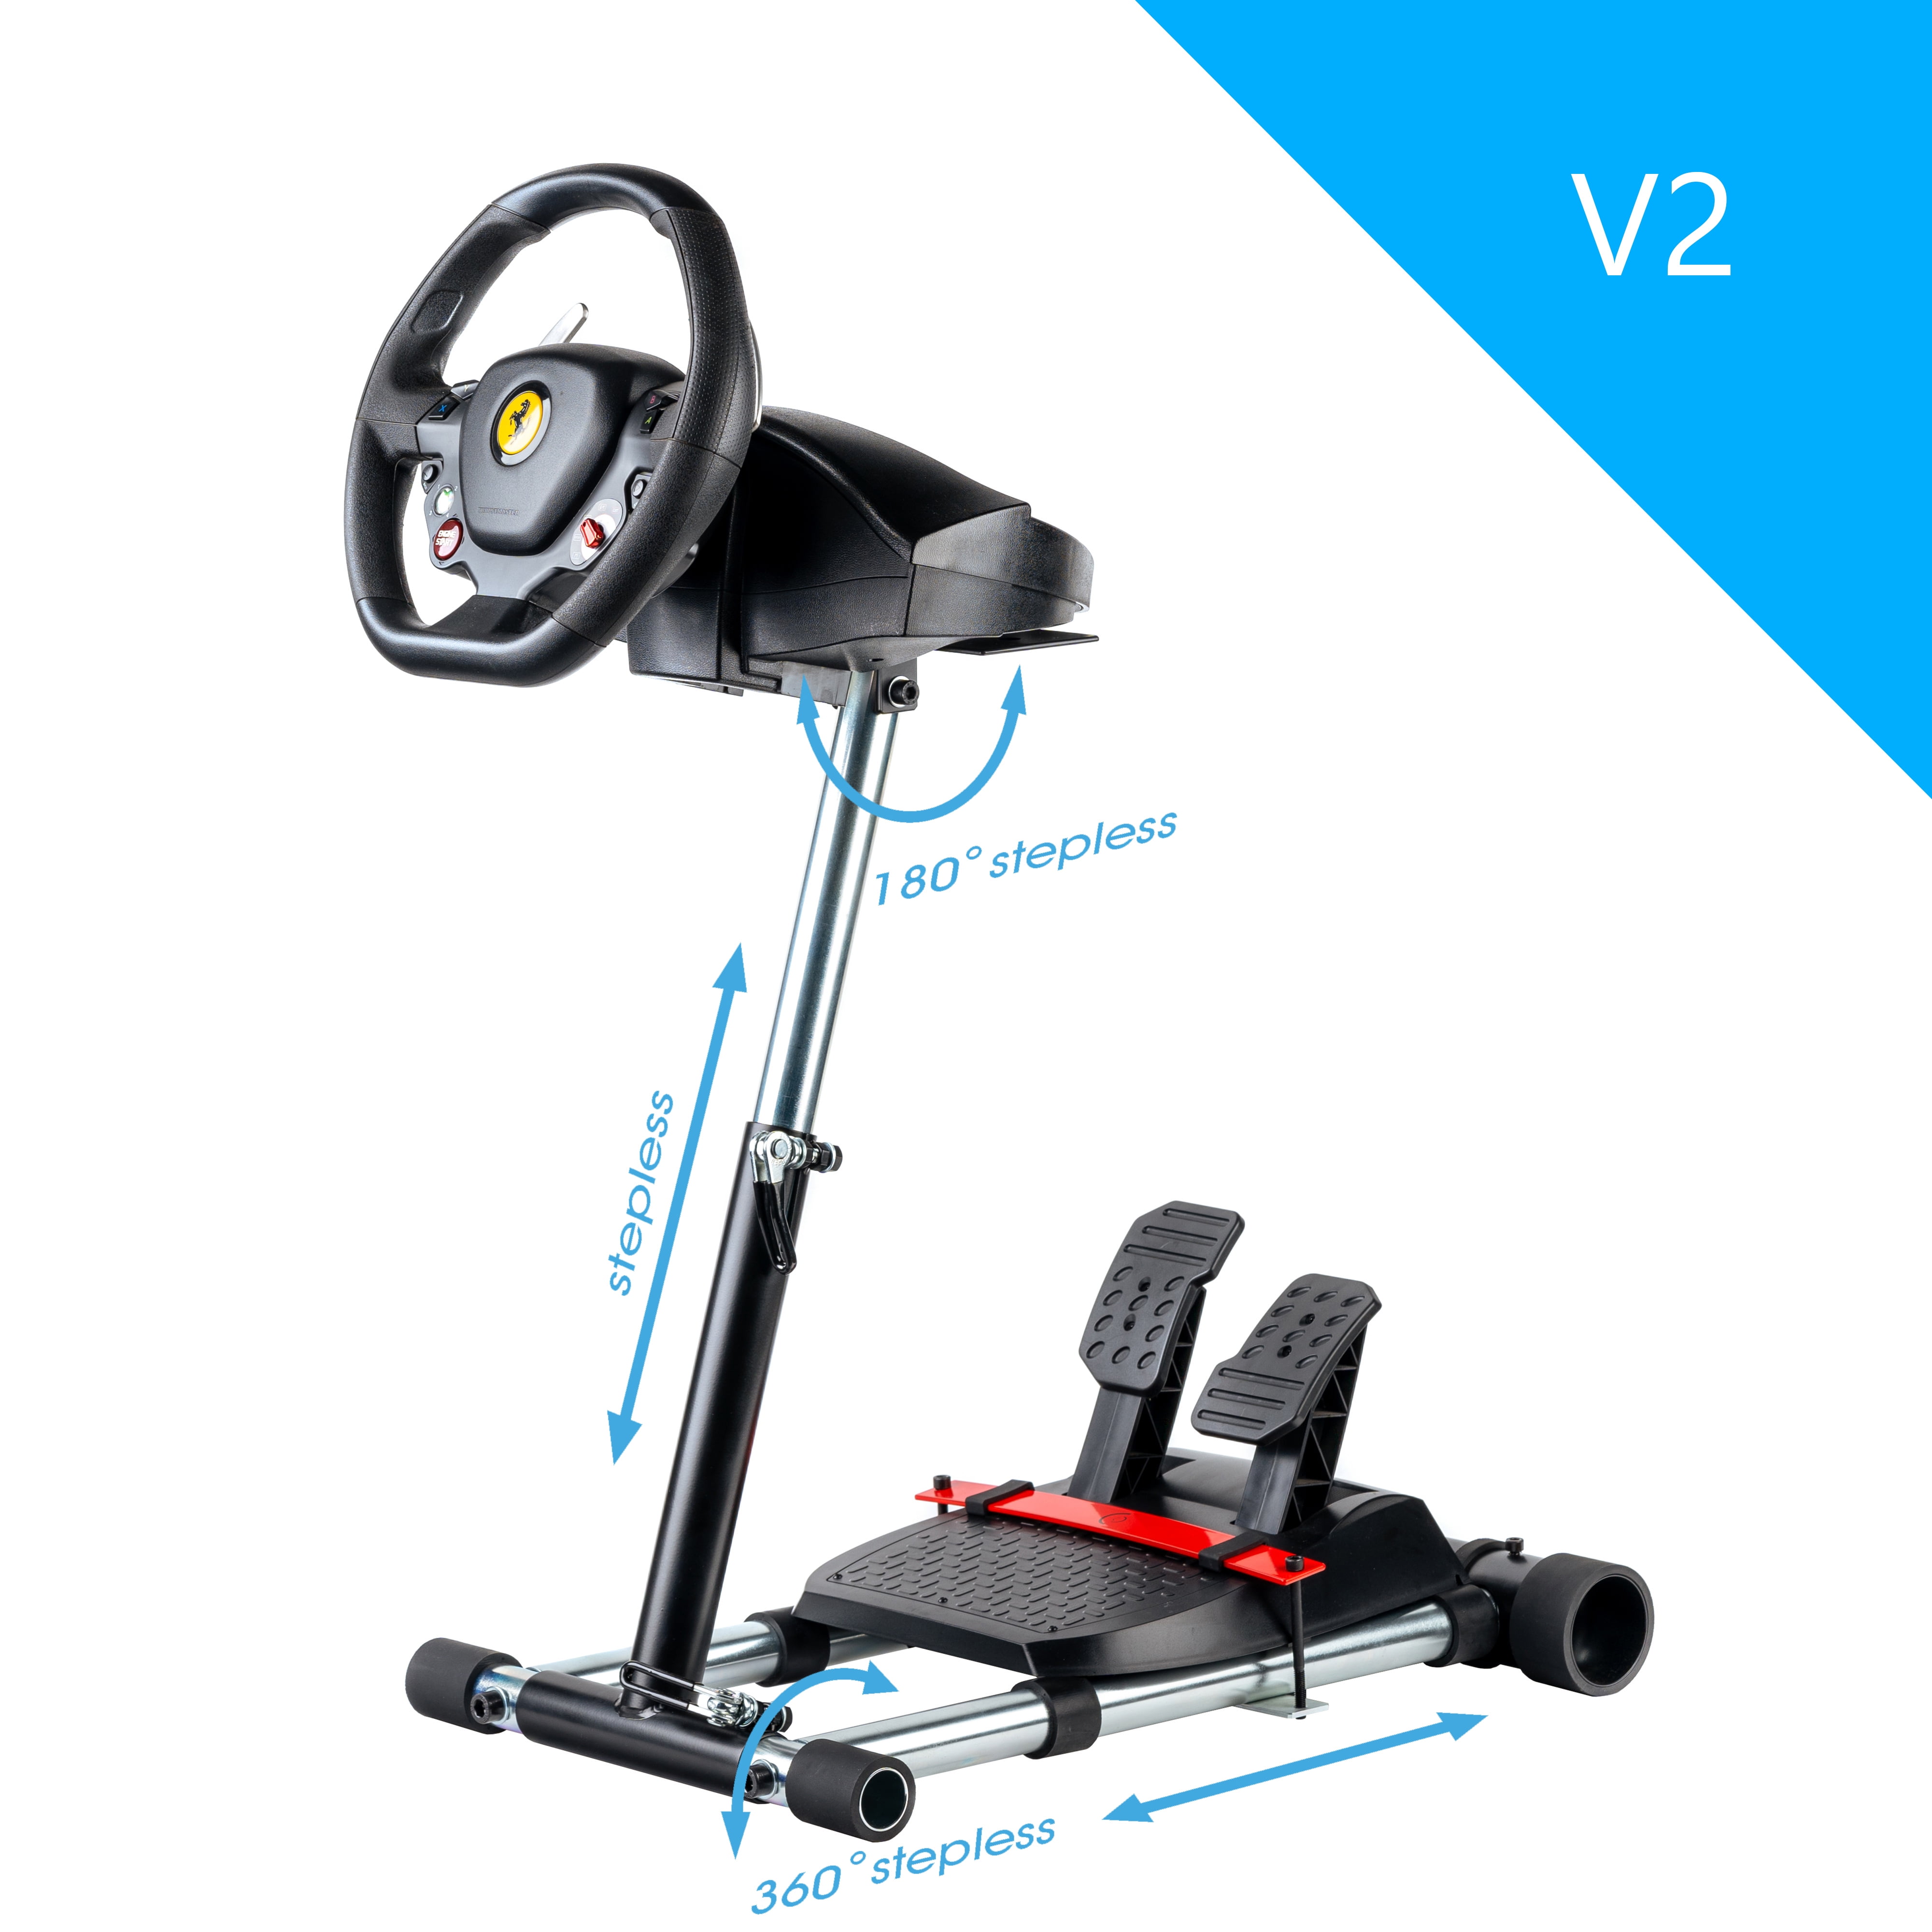 buik Bijdrage Lionel Green Street Wheel Stand Pro F458 Racing Wheelstand Compatible With Thrustmaster 458 ( Xbox 360 Version), F458 Spider (Xbox One), T80, T100, RGT, Ferrari GT and  F430; Original V2 Stand: Wheel/Pedals Not included - Walmart.com